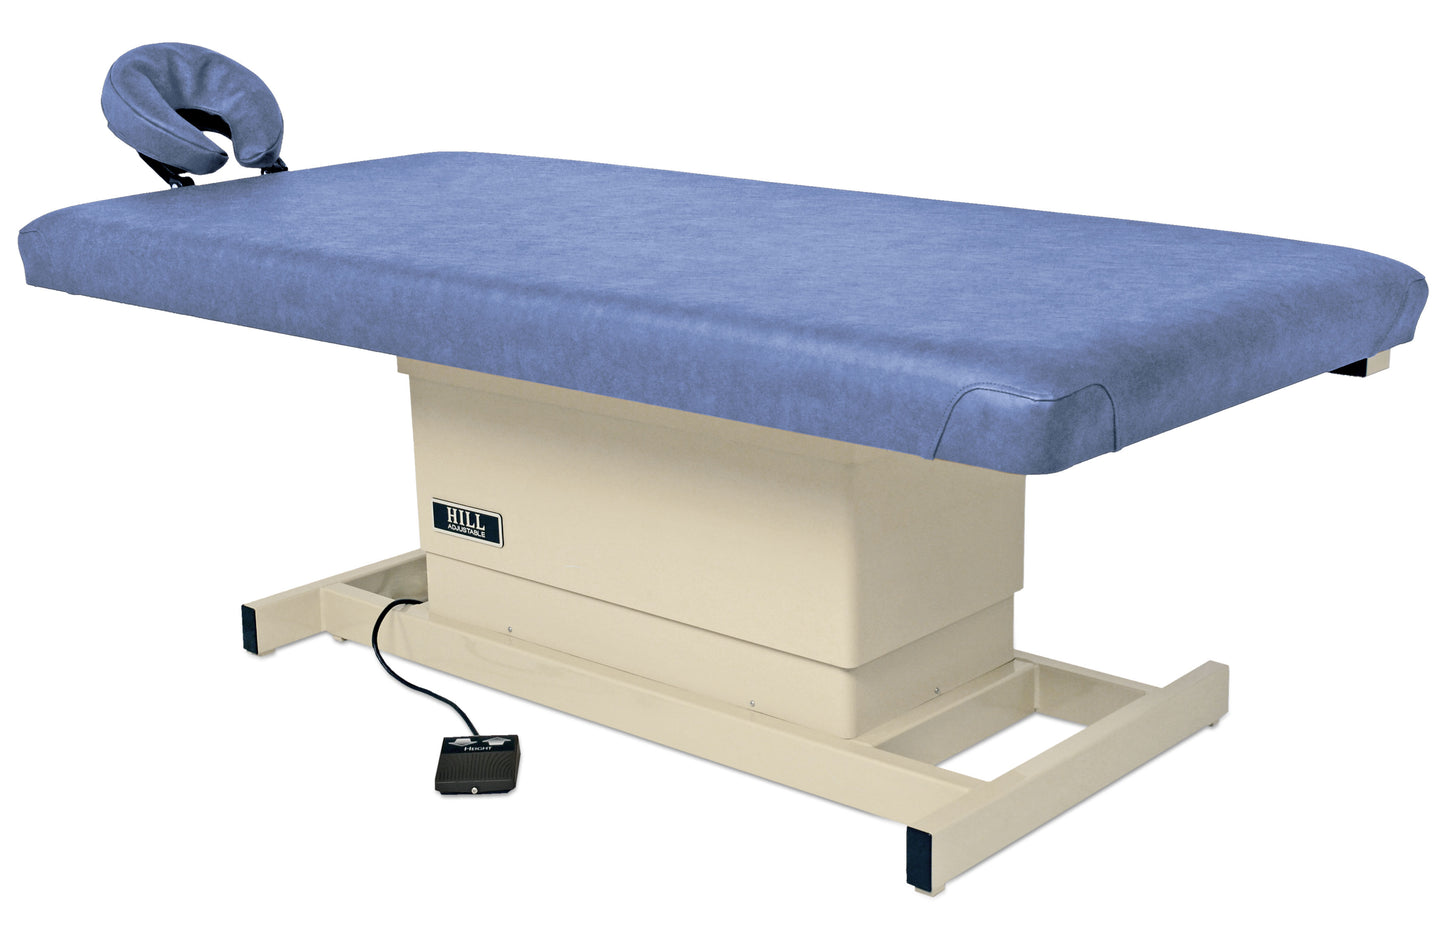 Hill Laboratories - Rolfing Table for Structural Integration and Soft Tissue Manipulation - Superb Massage Tables